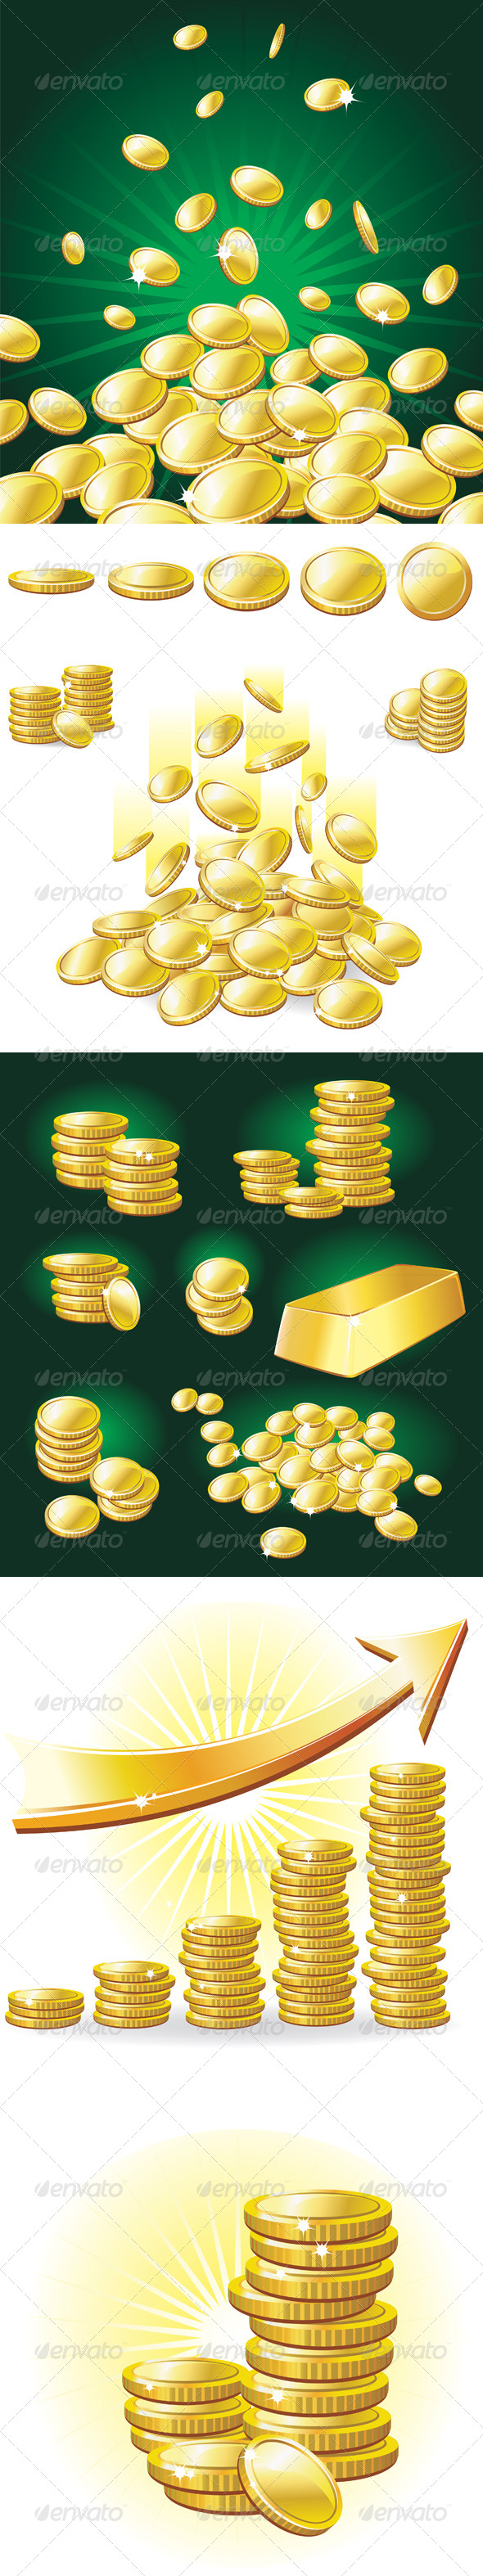 GraphicRiver Set of Gold Coins 7668355